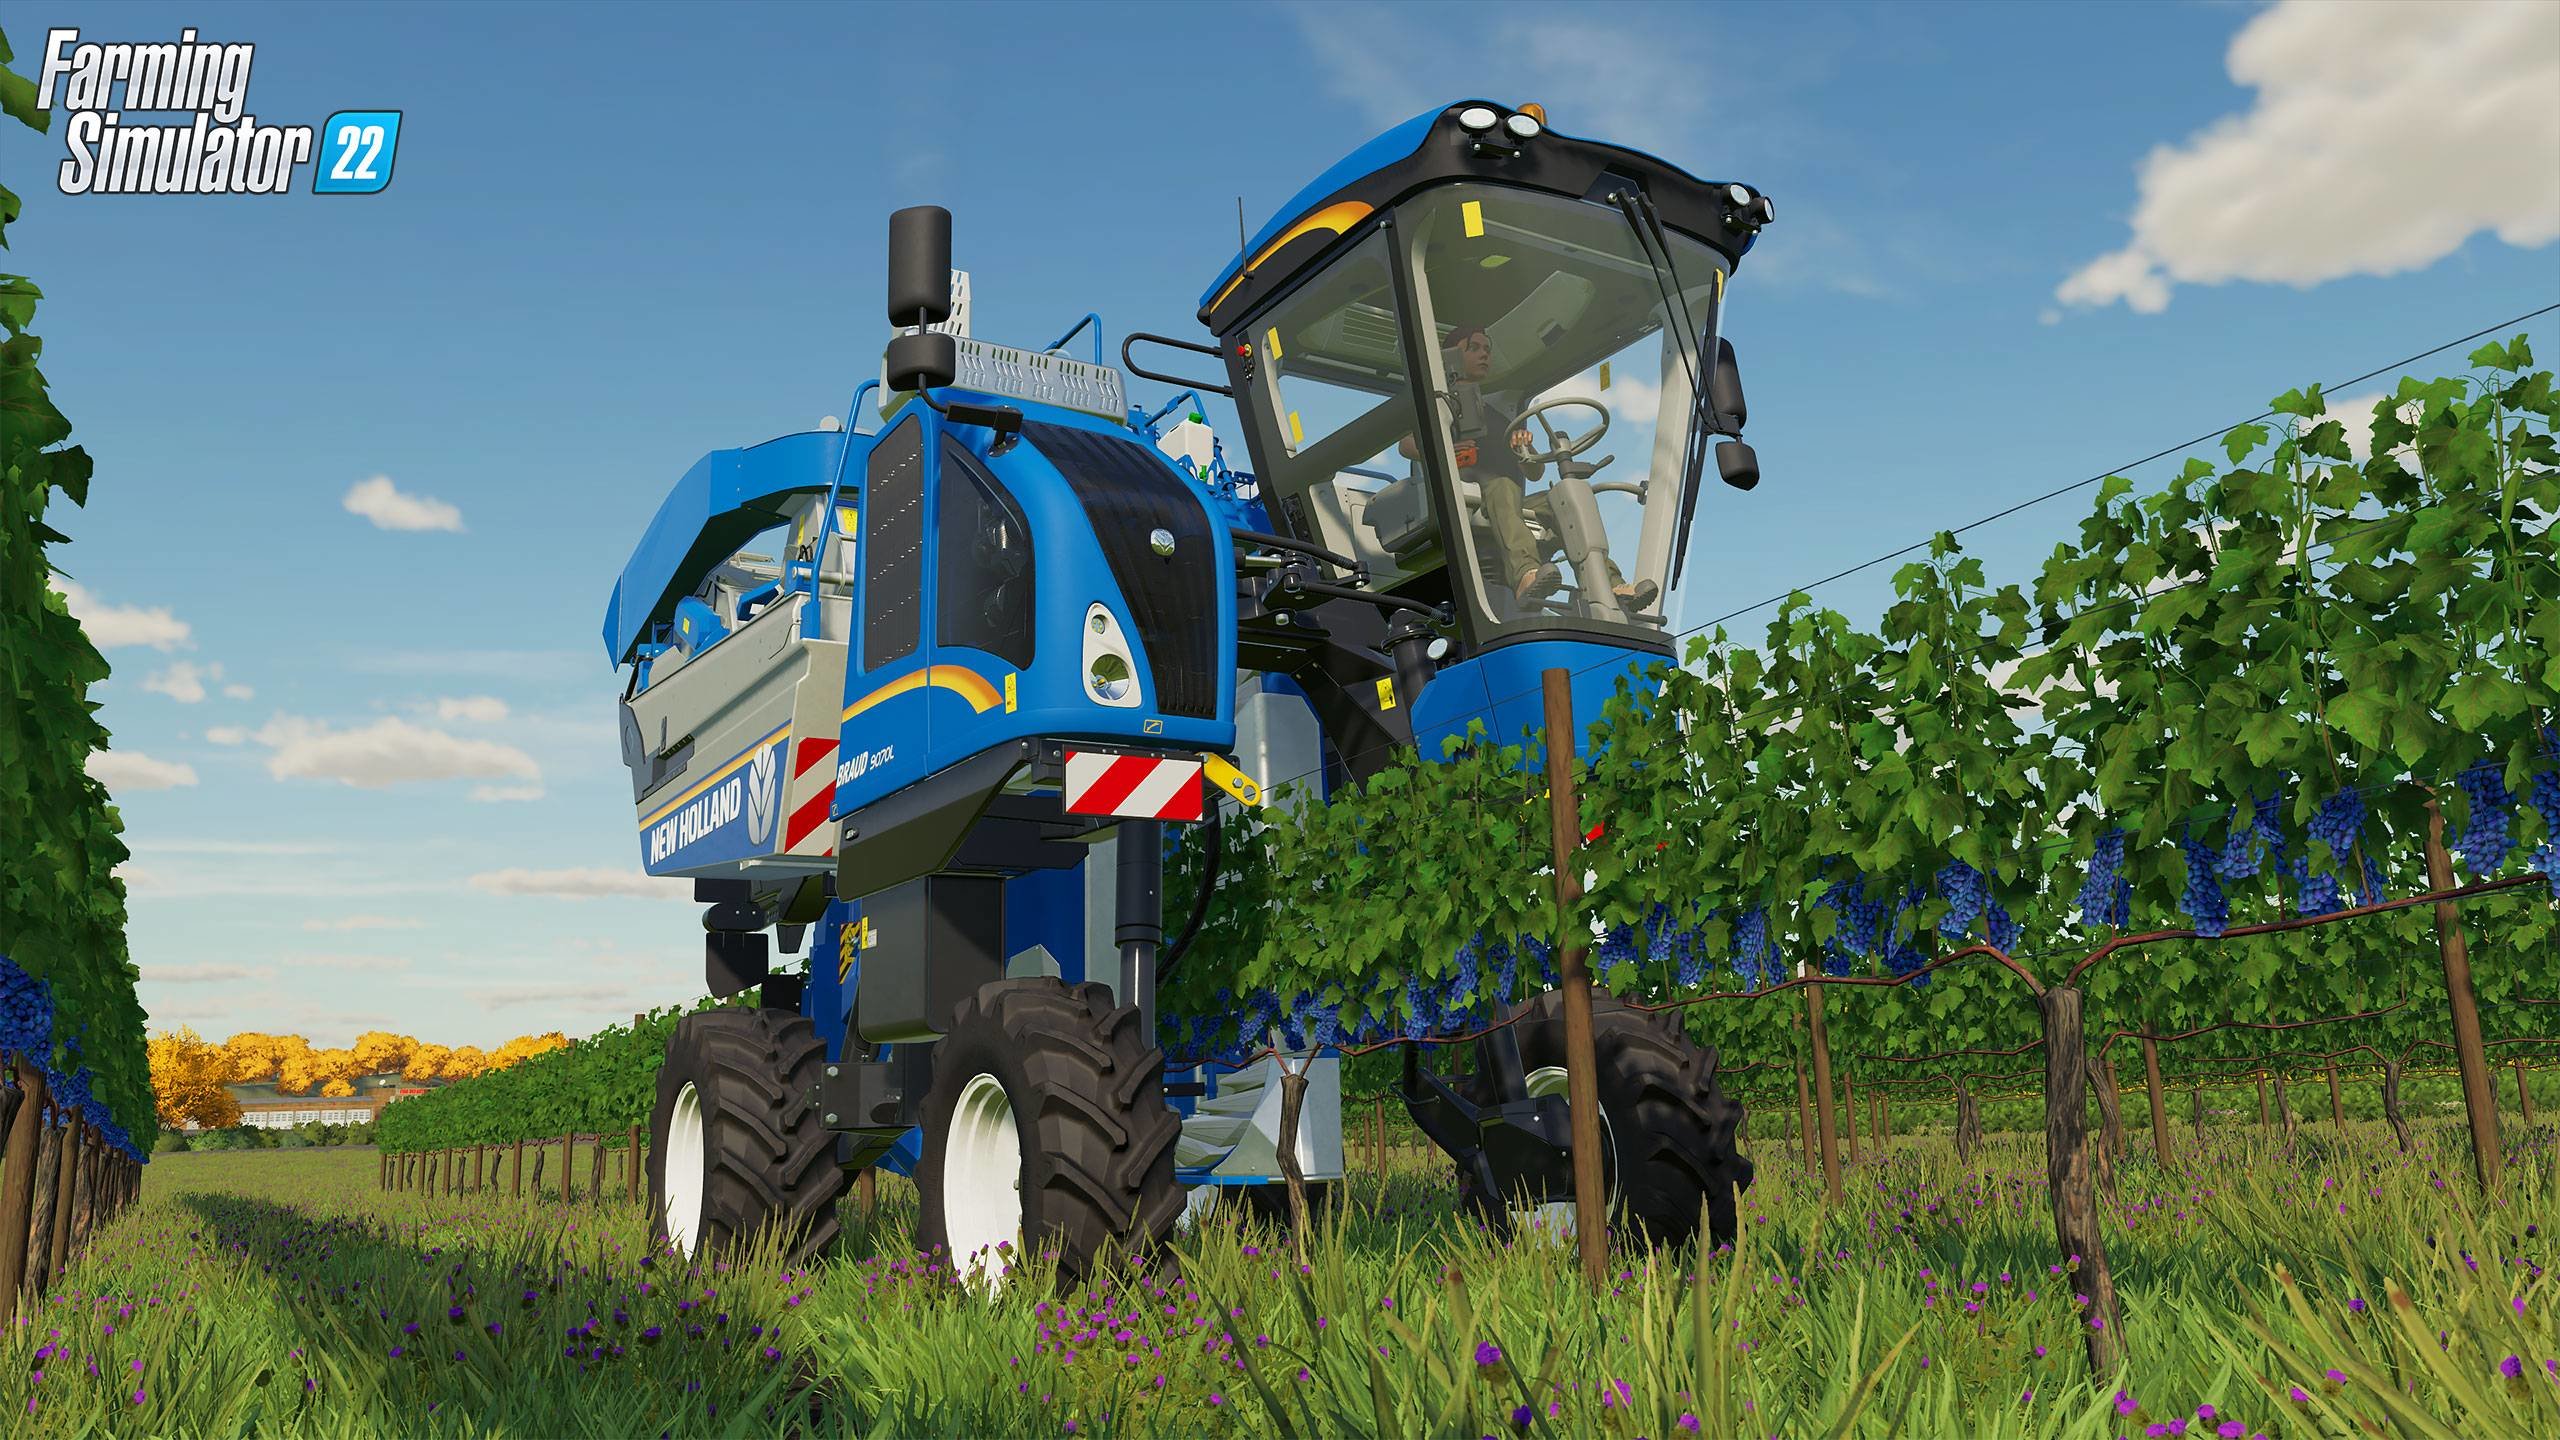 Farming Simulator 2022 sells more than 1.5 million copies in its first week  - , We Make Games Our Business